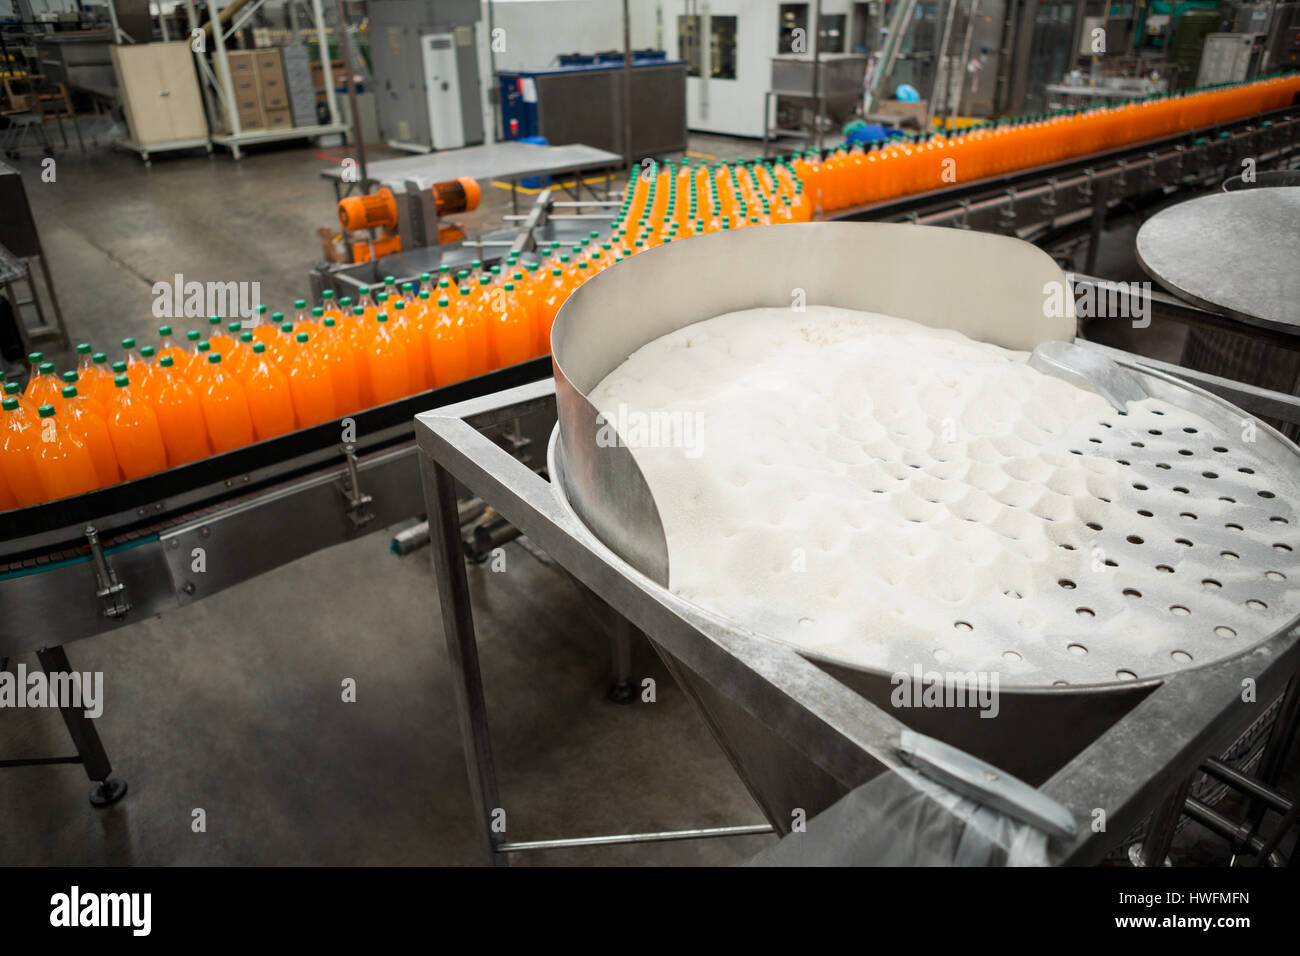 High angle view of orange cold drink bottles on production line in factory Stock Photo